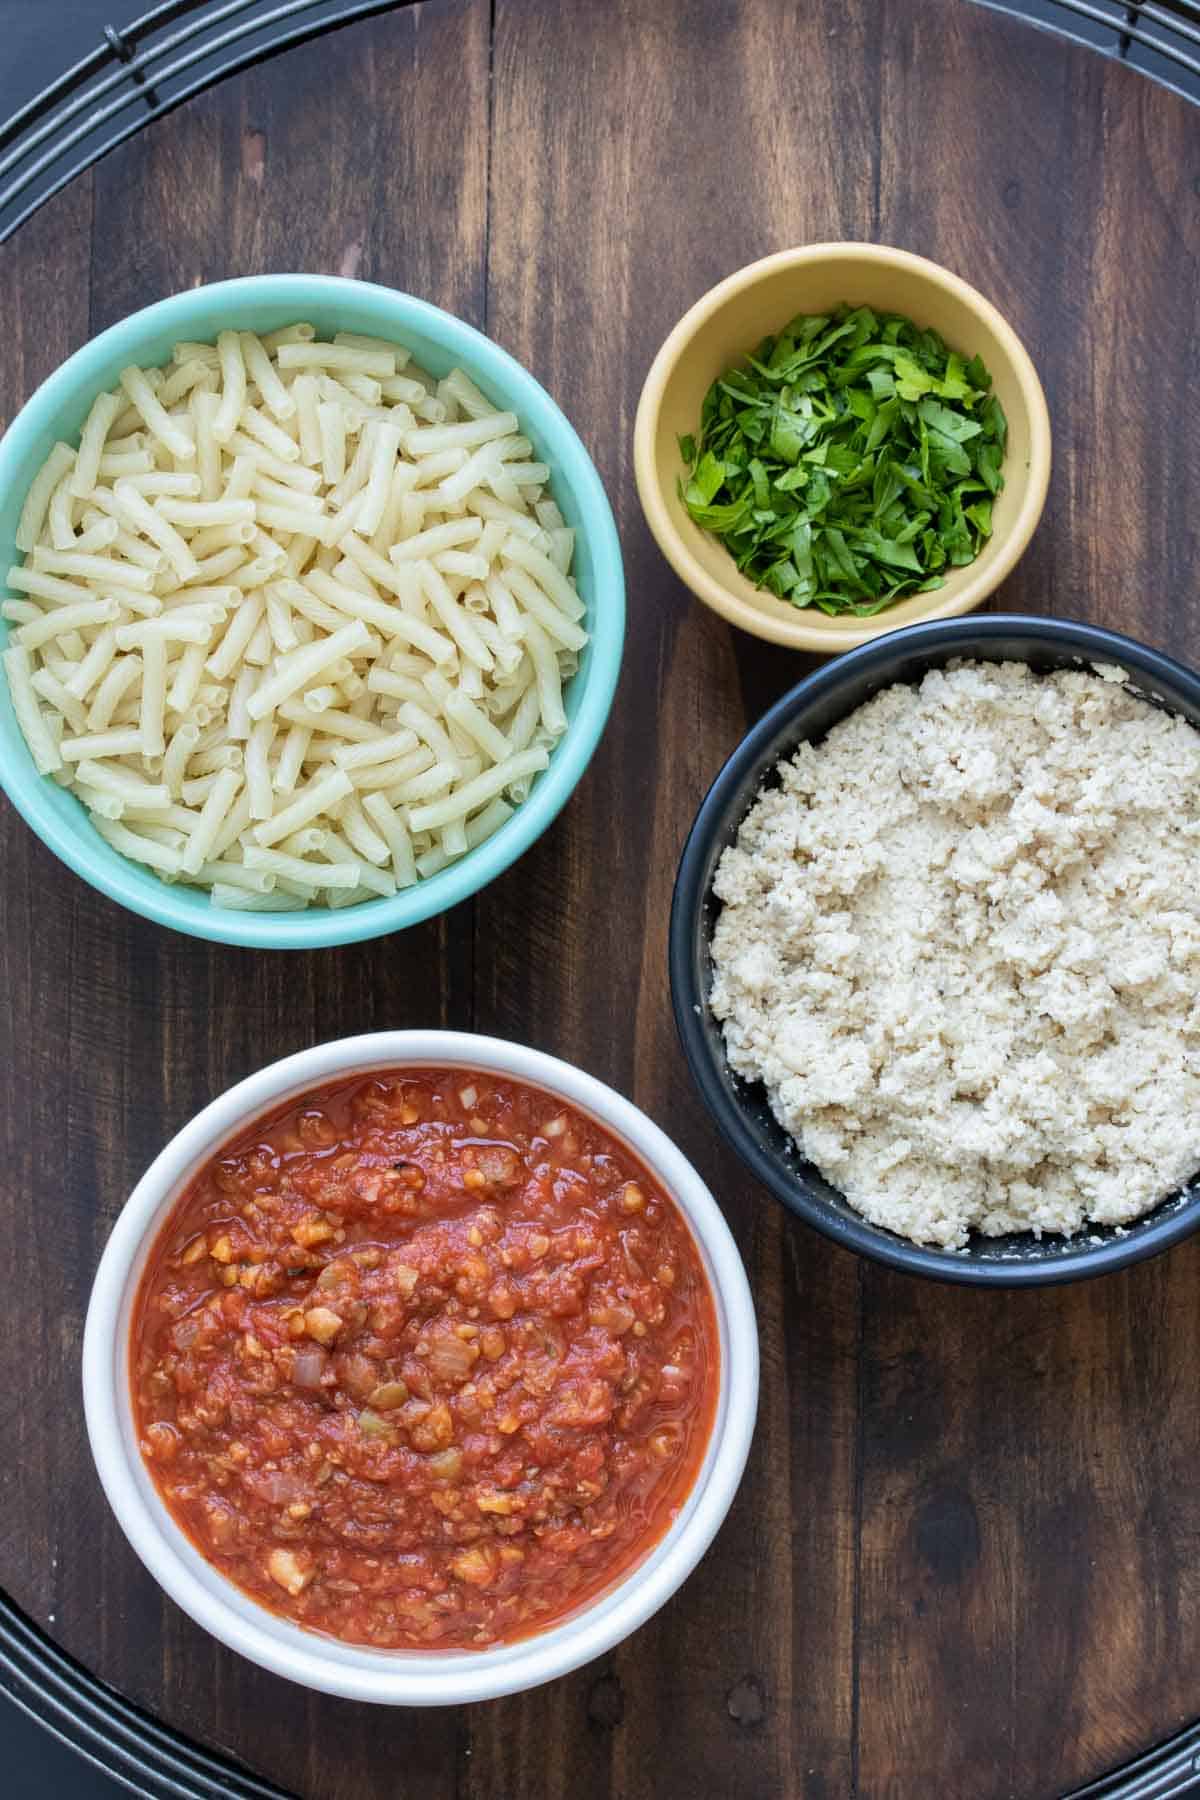 Bowls with ingredients to make a baked pasta and sauce dish